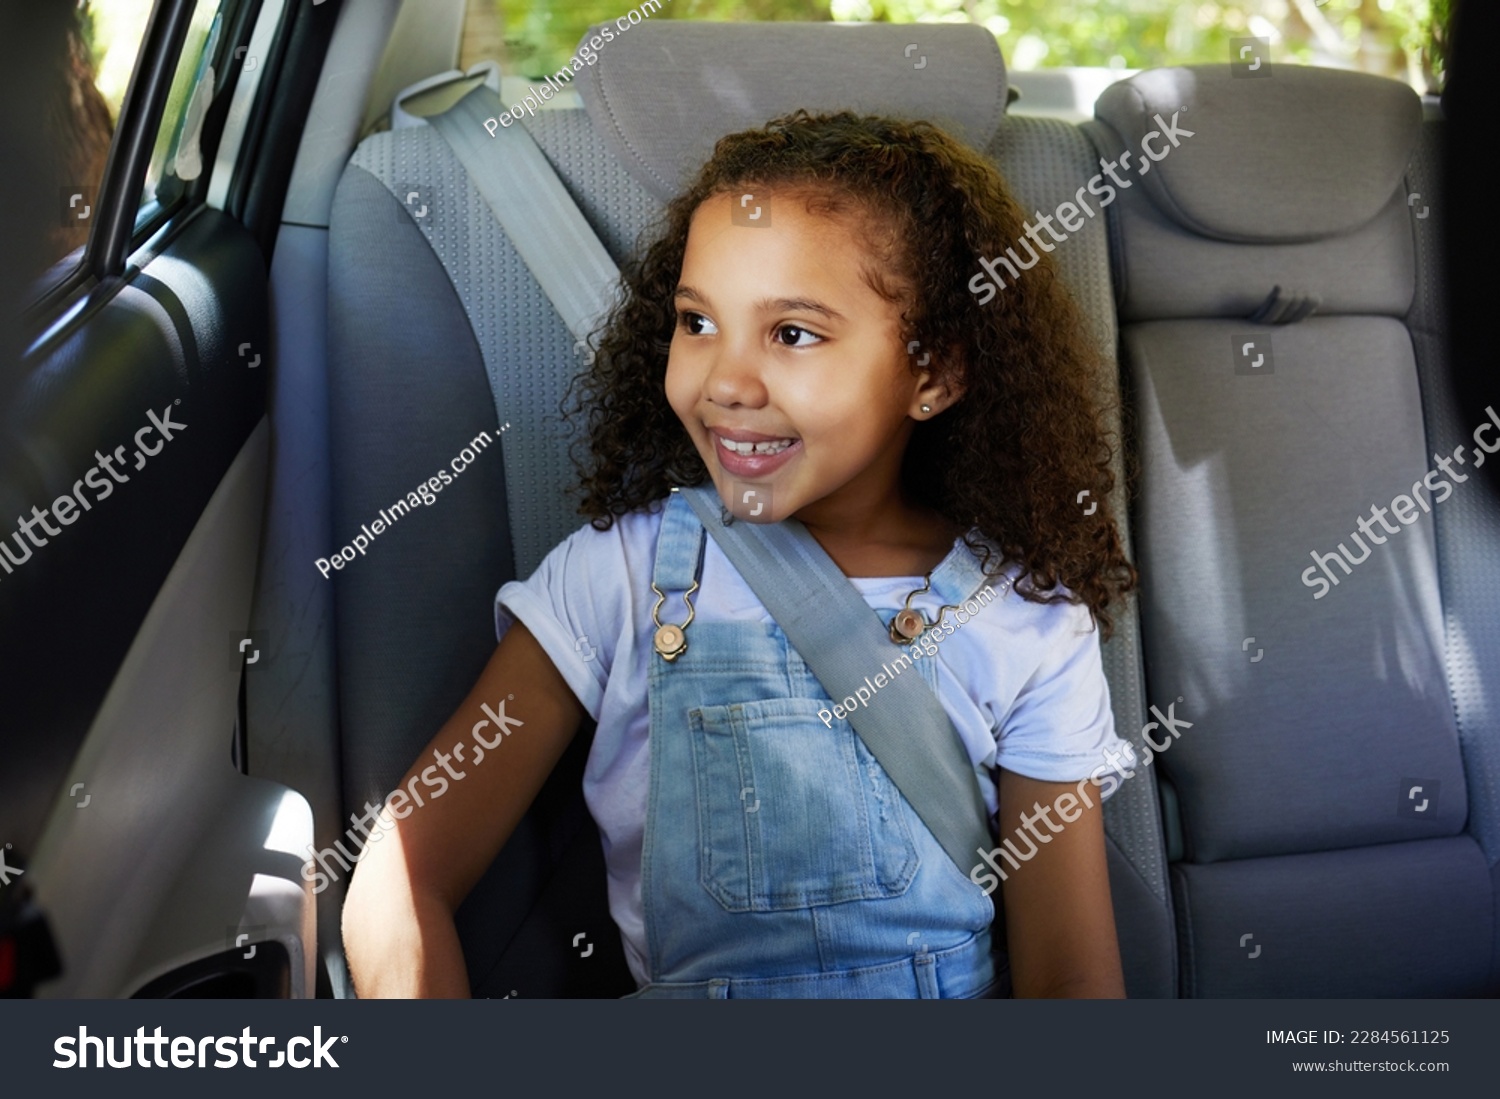 Road trip, girl child and happy in car backseat for travel, journey and drive, happy and relax. Smile, kid and little passenger enjoying drive in vehicle for adventure, vacation or weekend traveling #2284561125